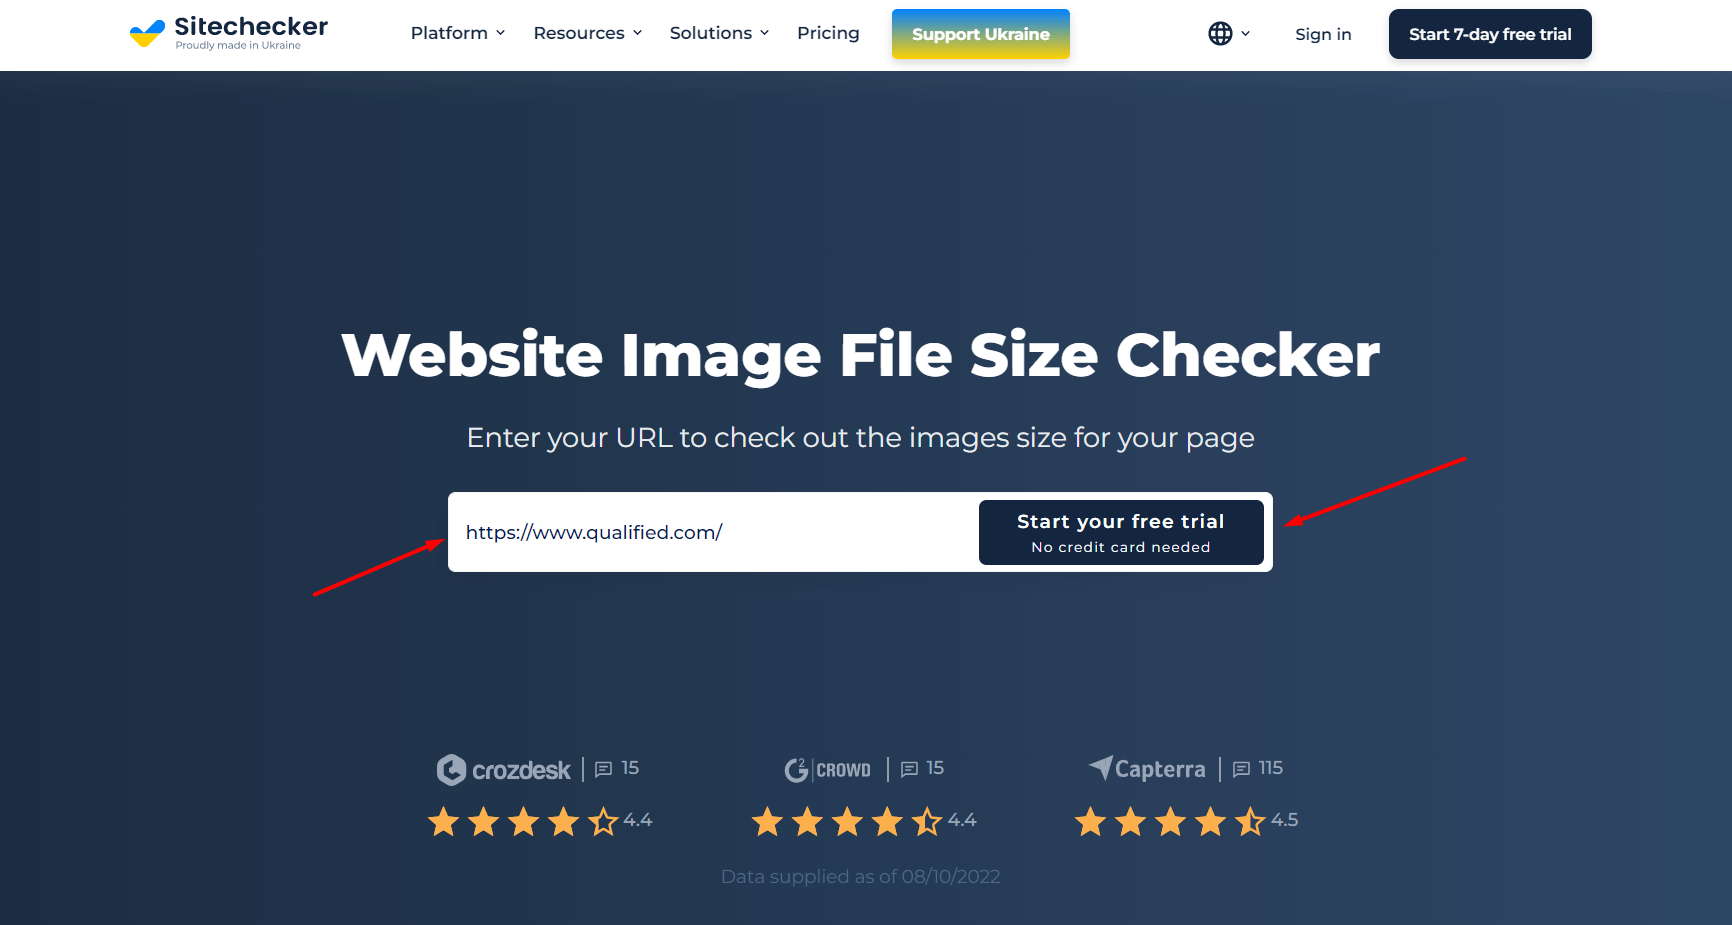 Site image sizes file checker first step